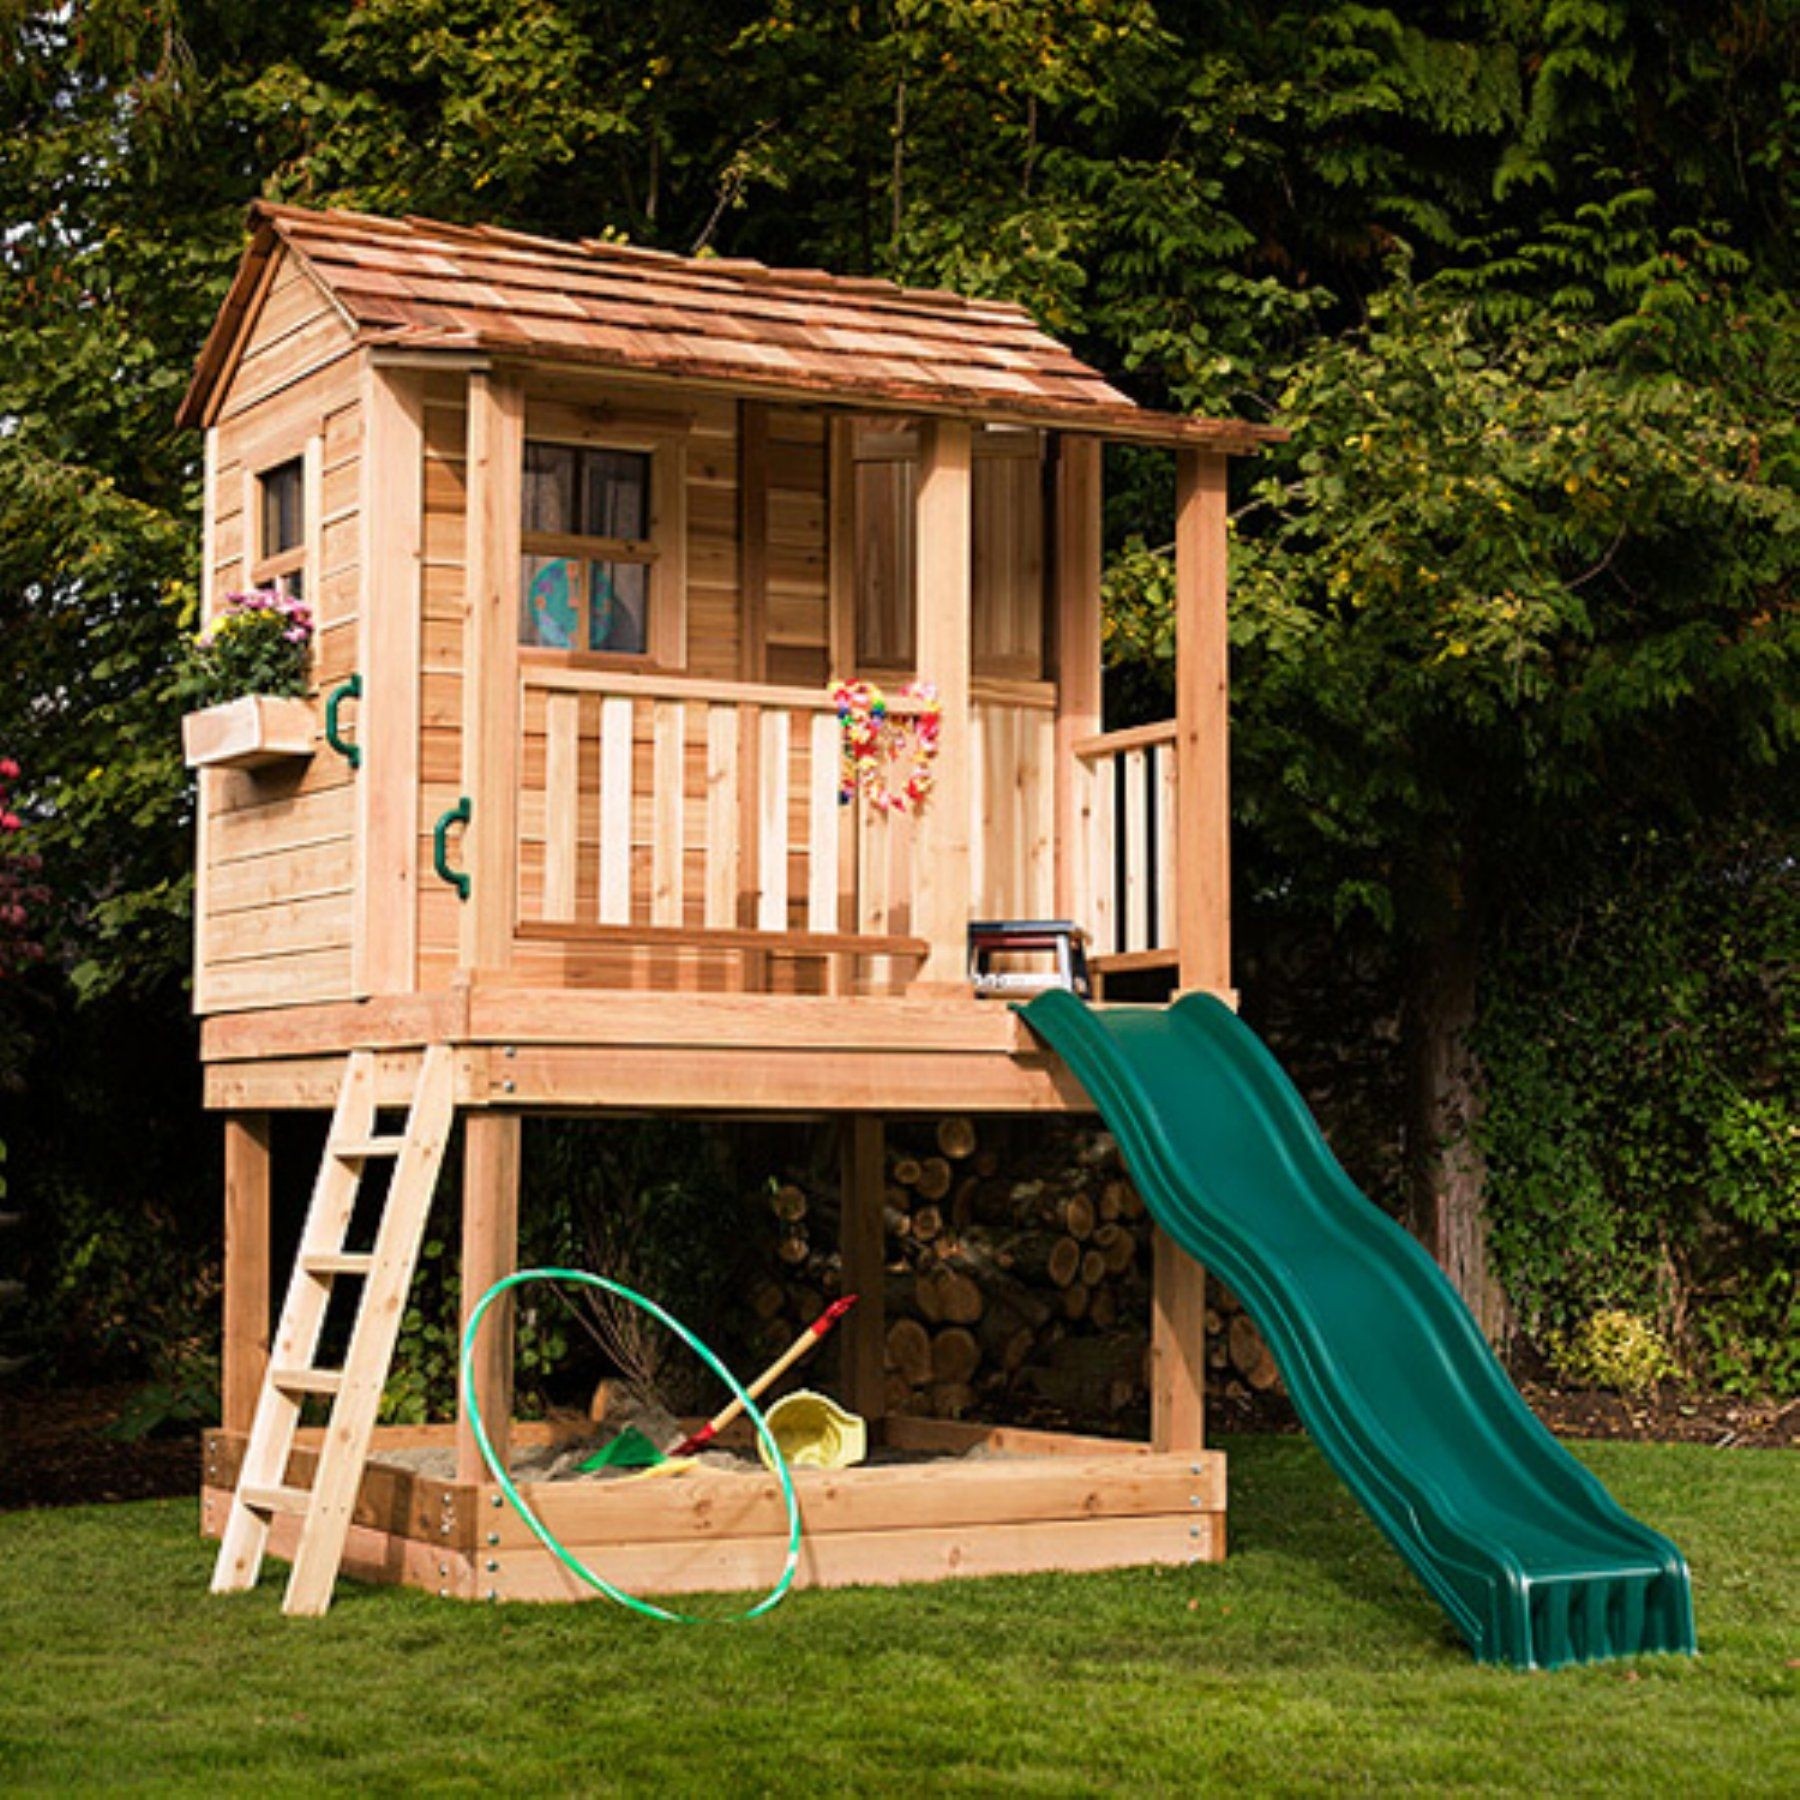 playhouse for 9 year old